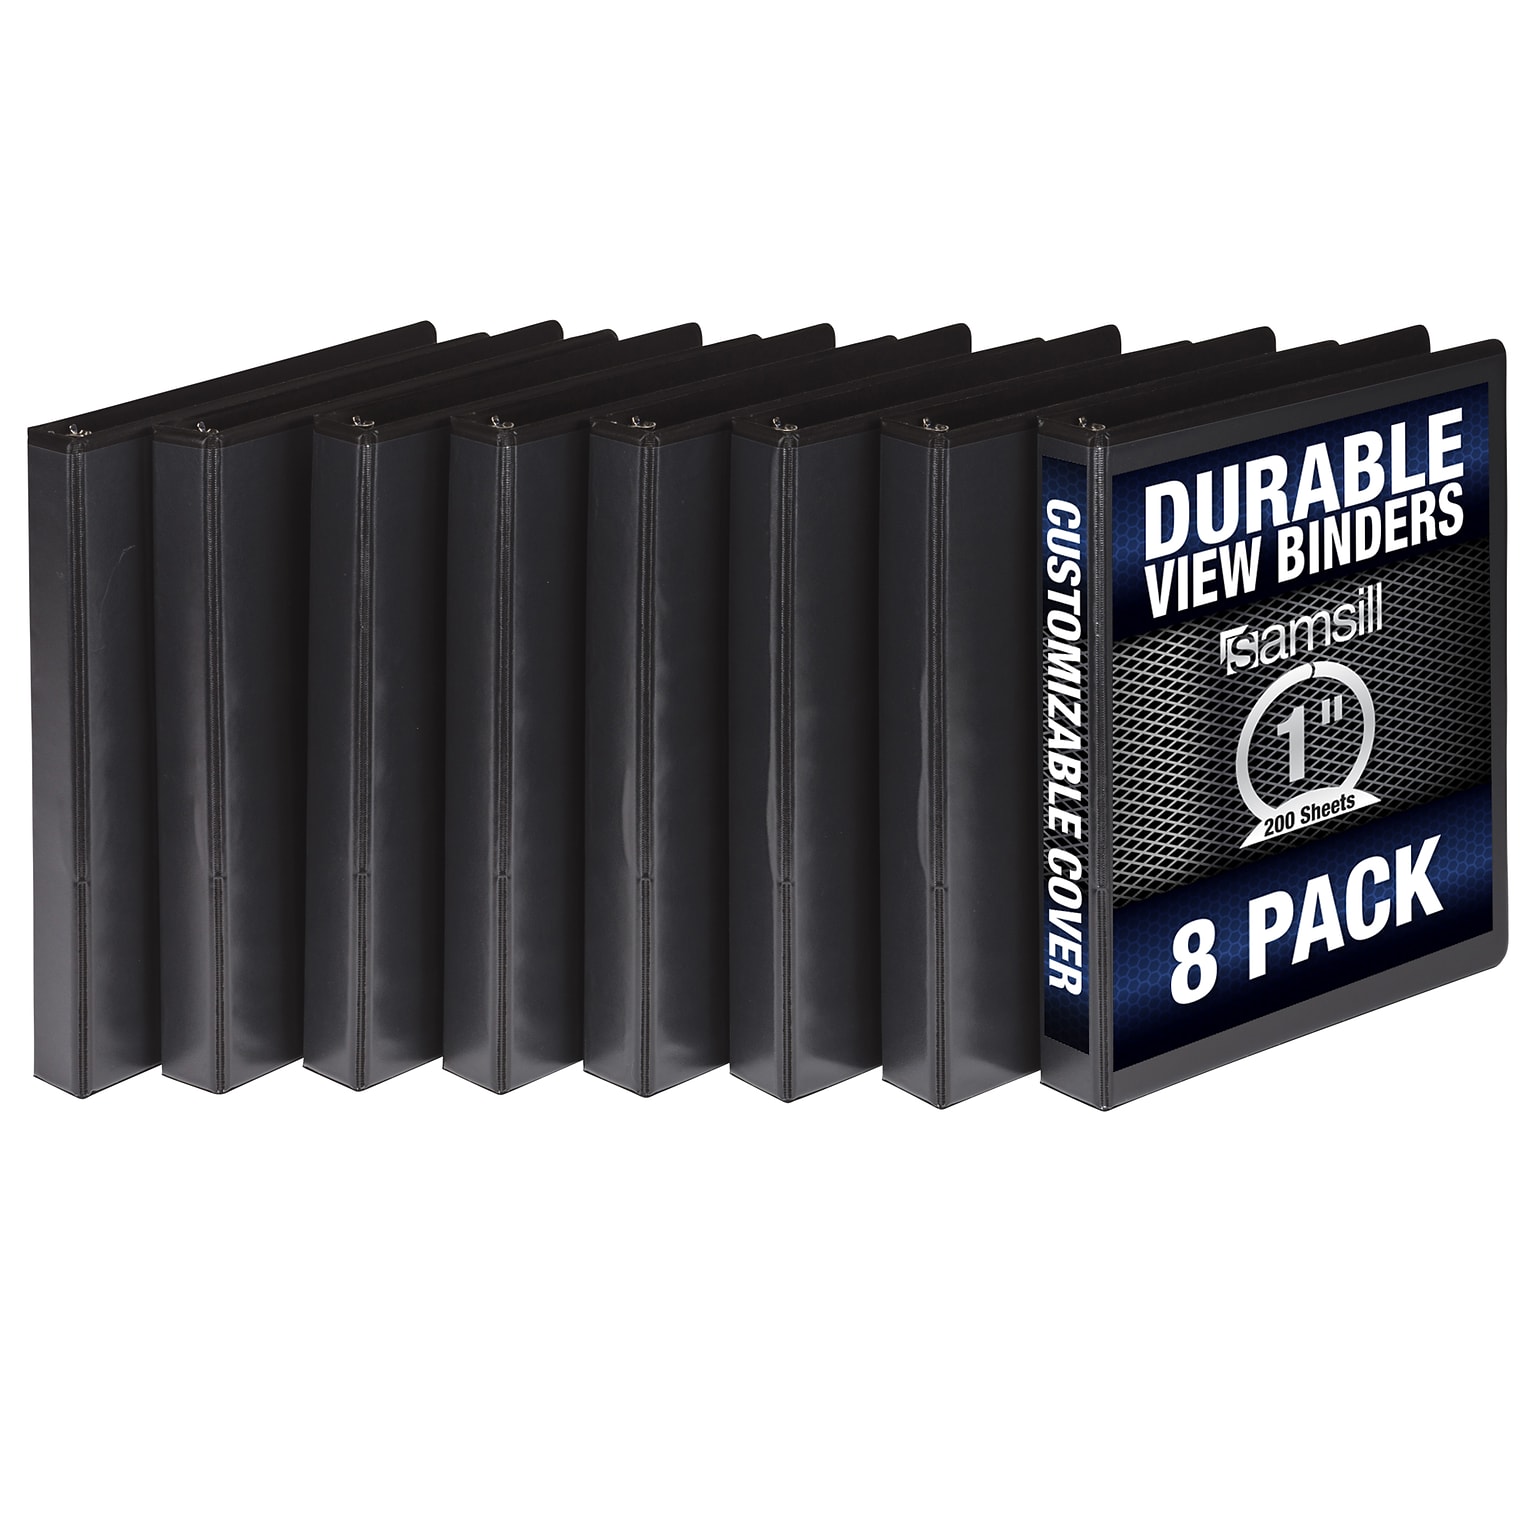 Samsill Durable 1 3-Ring View Binders, Black, 8/Pack (S88430)